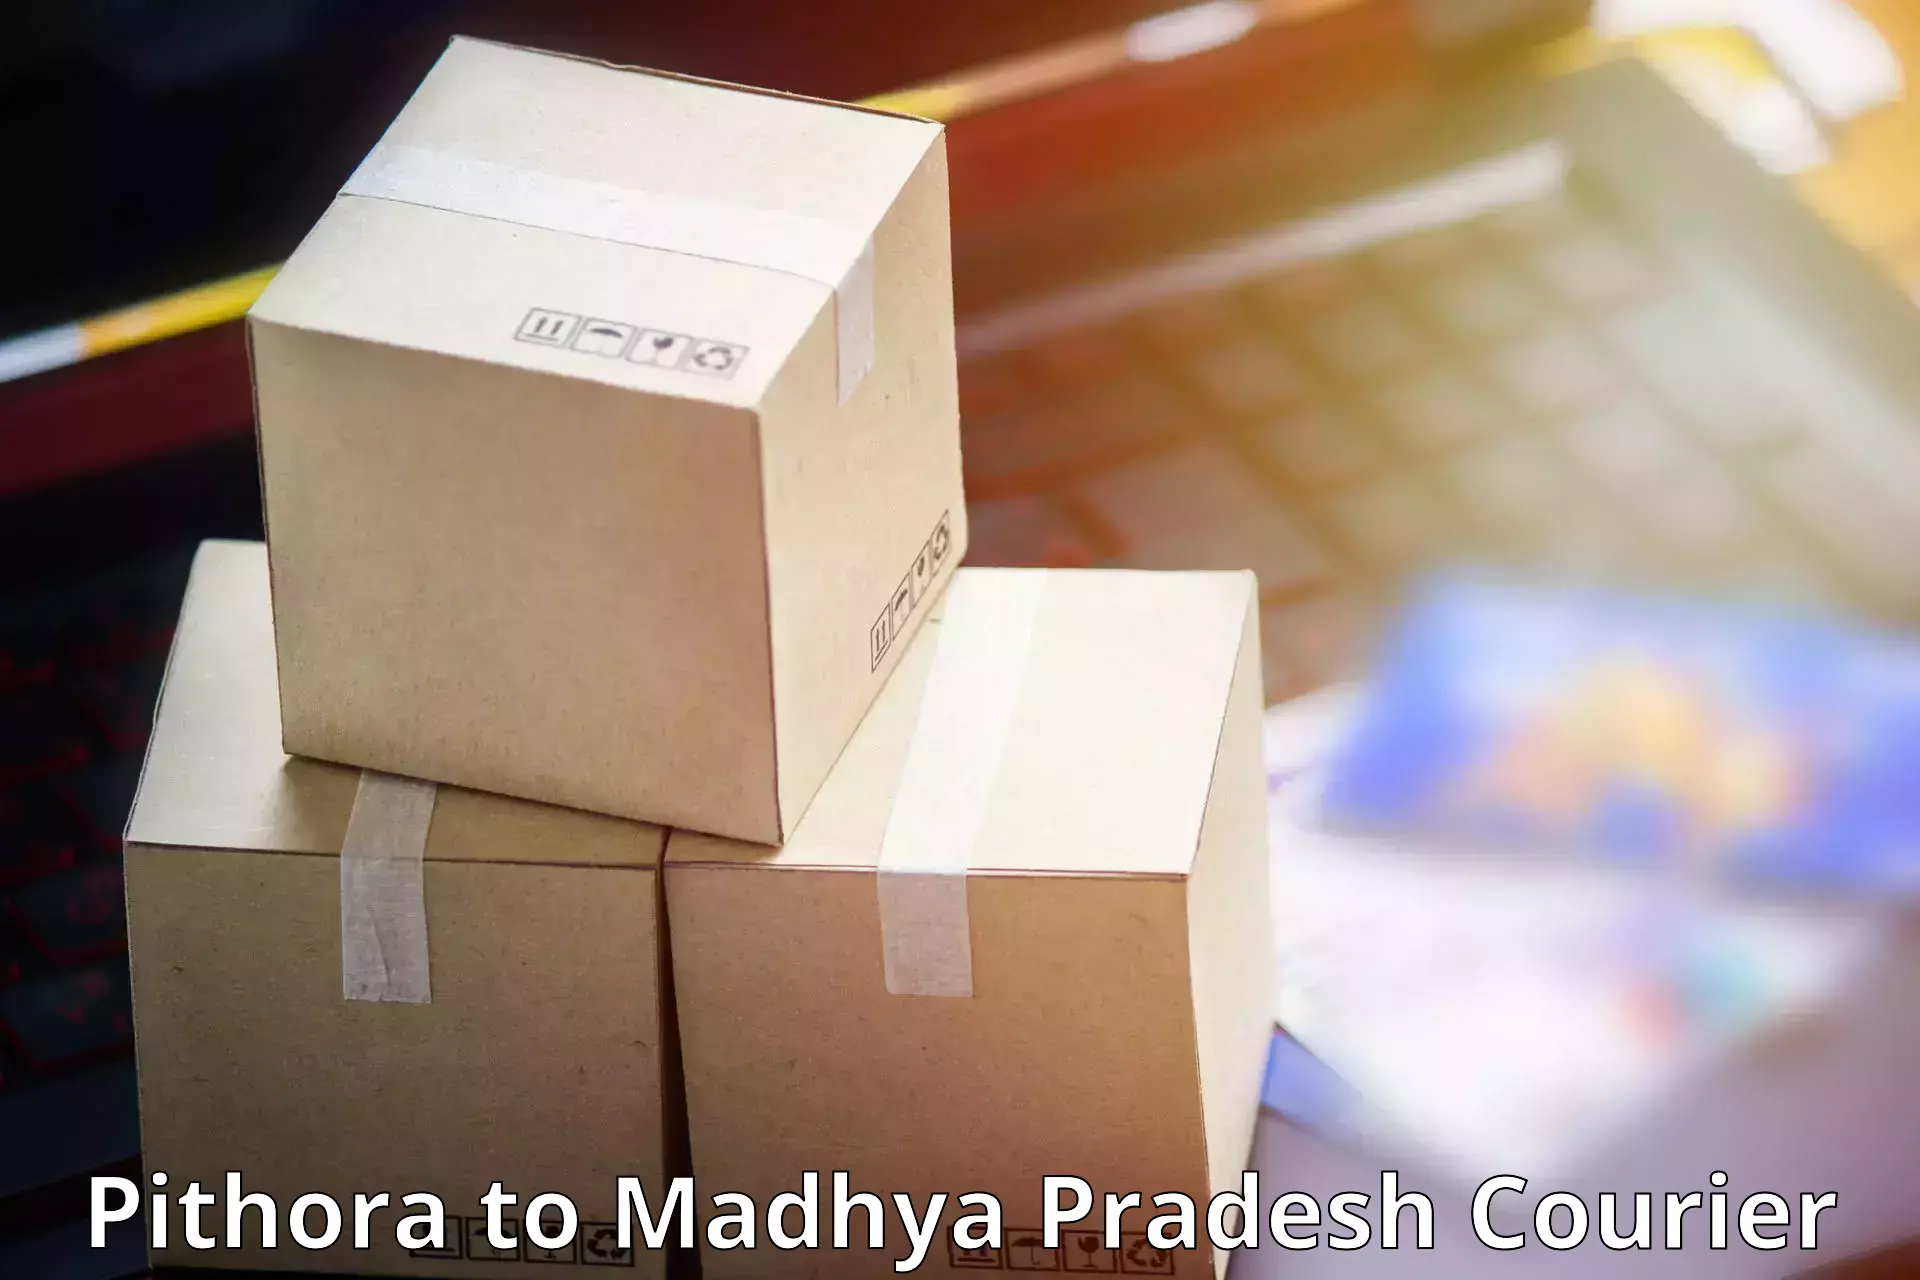 Easy access courier services Pithora to Raghogarh